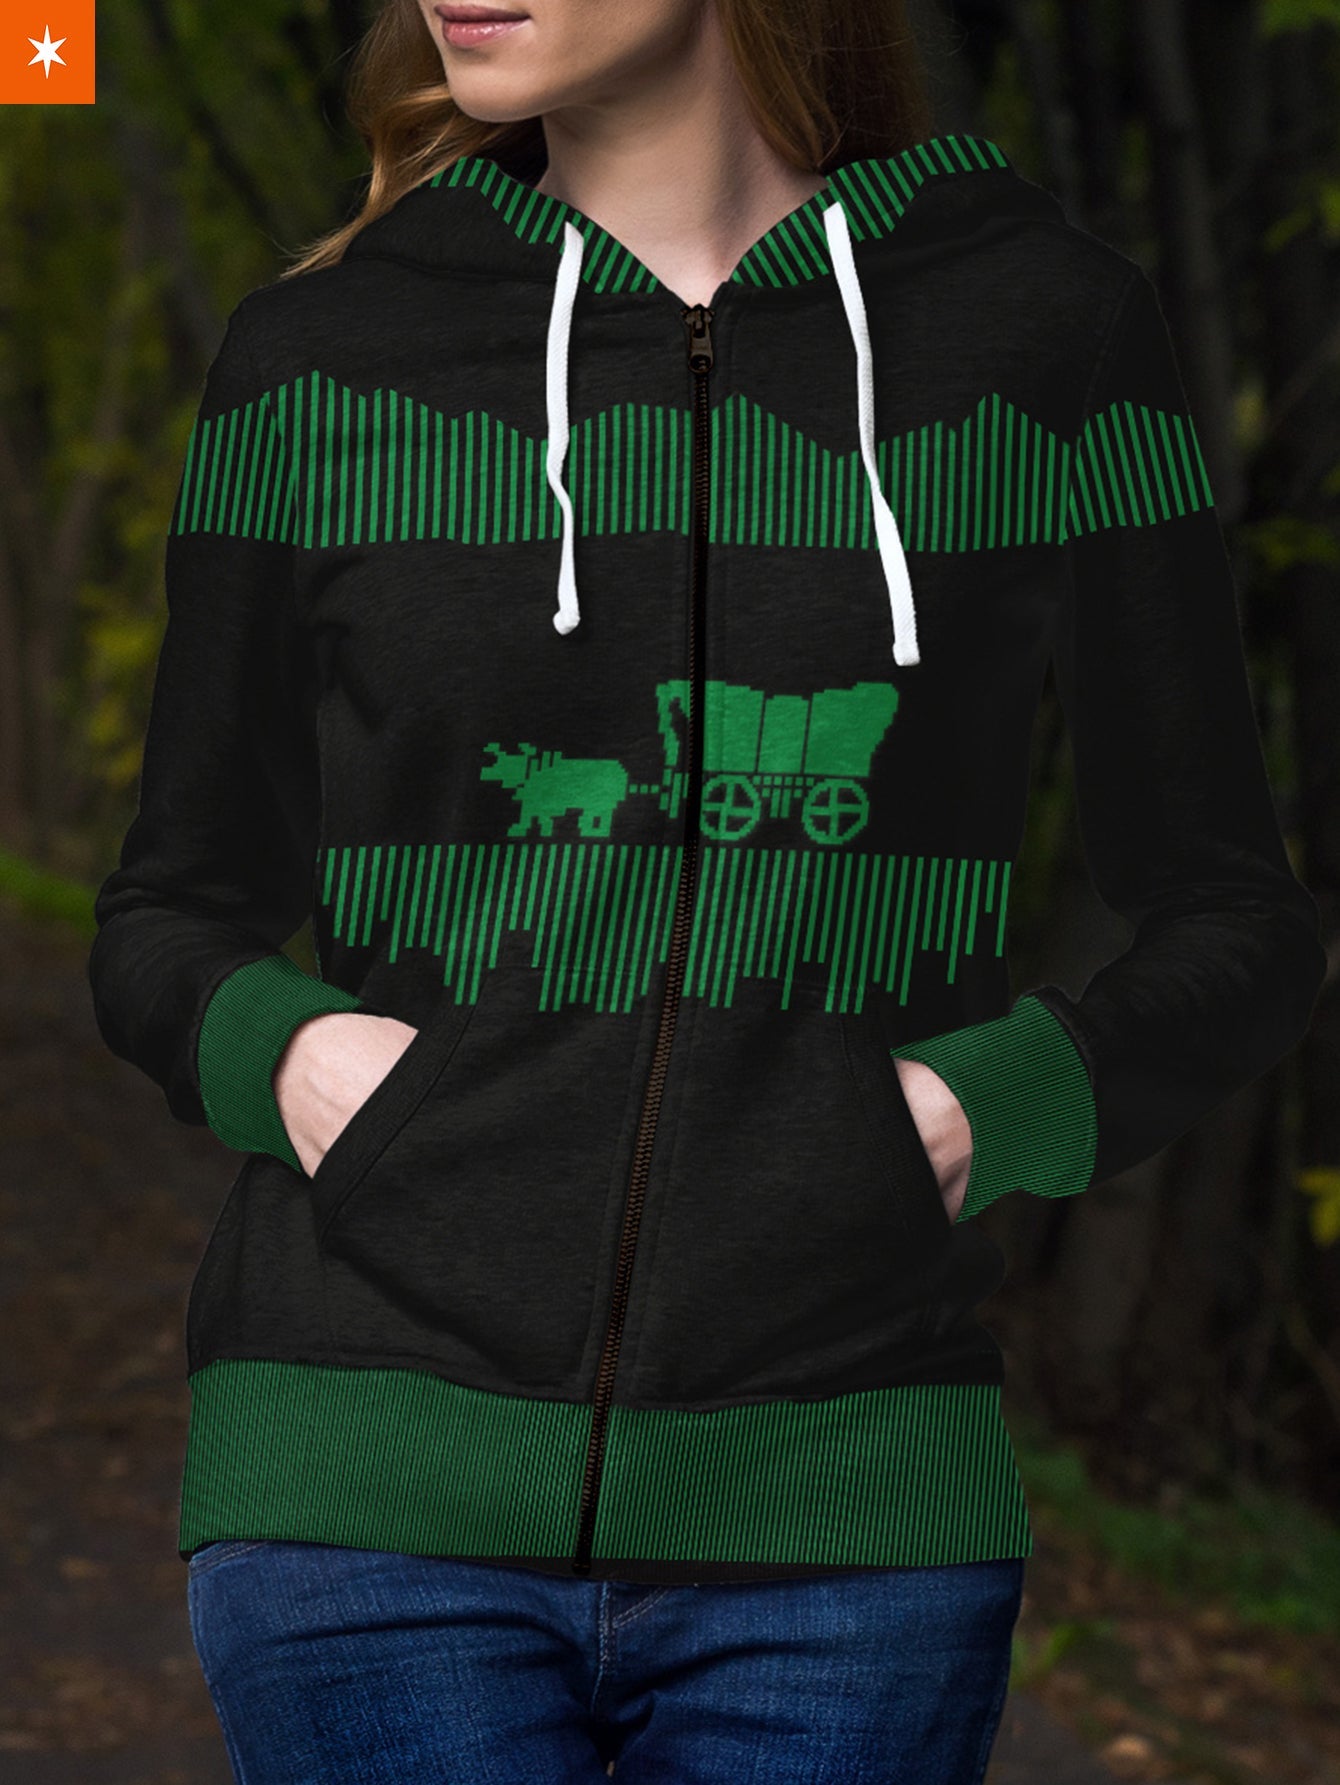 Fandomaniax - Died of Dysentery Unisex Zipped Hoodie